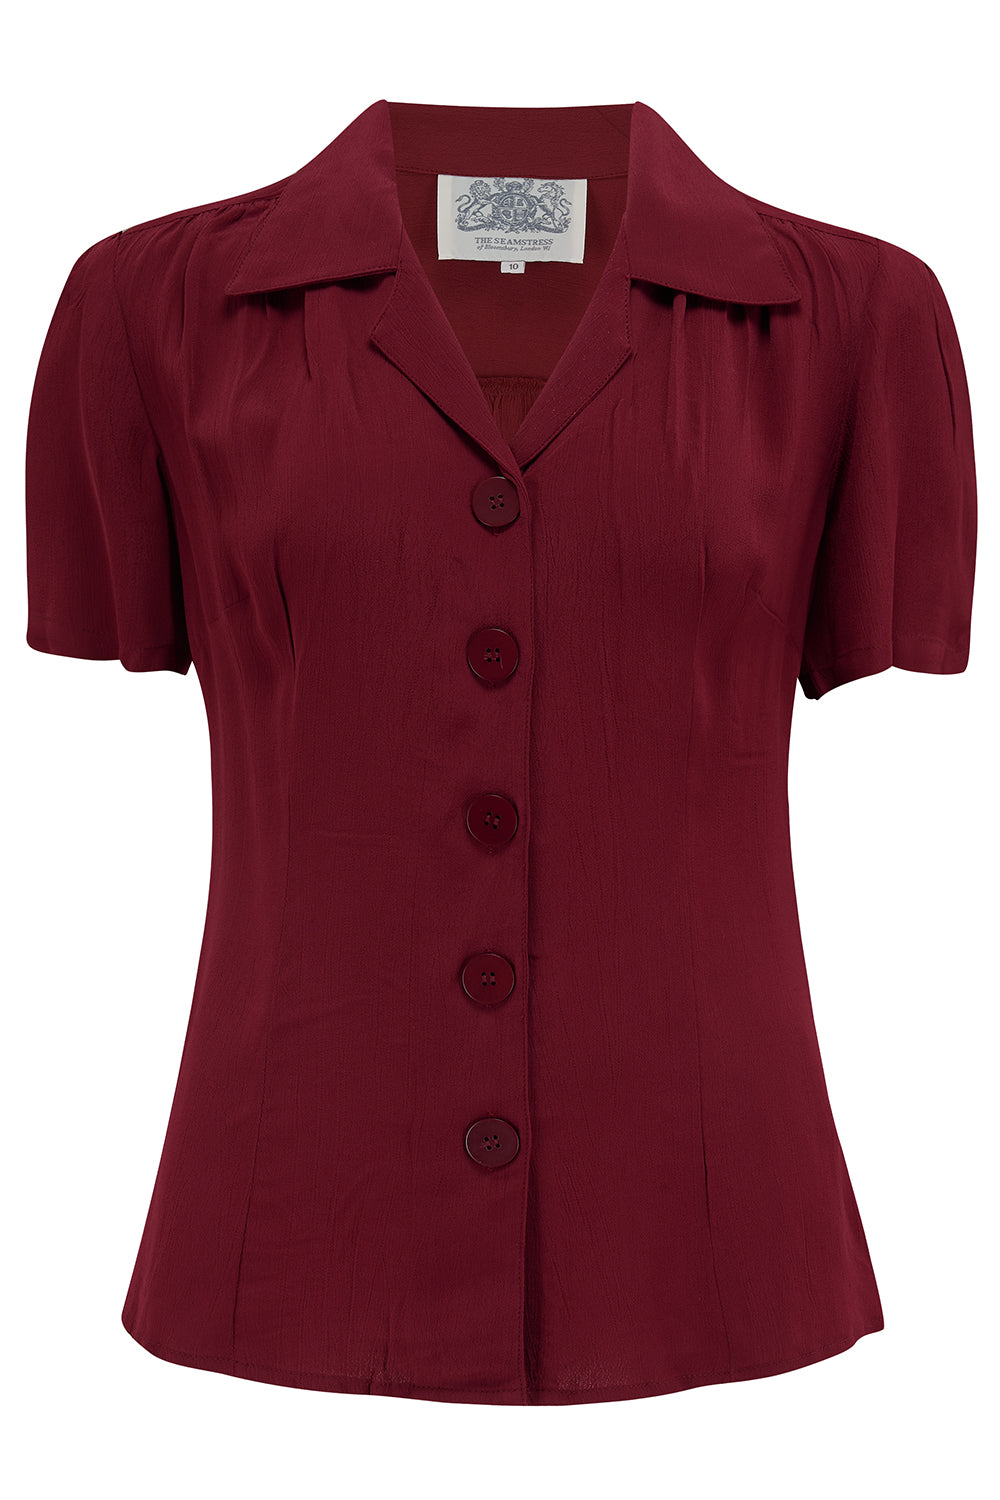 "Grace" Blouse in Wine, Authentic & Classic 1940s Vintage Style - True and authentic vintage style clothing, inspired by the Classic styles of CC41 , WW2 and the fun 1950s RocknRoll era, for everyday wear plus events like Goodwood Revival, Twinwood Festival and Viva Las Vegas Rockabilly Weekend Rock n Romance The Seamstress Of Bloomsbury